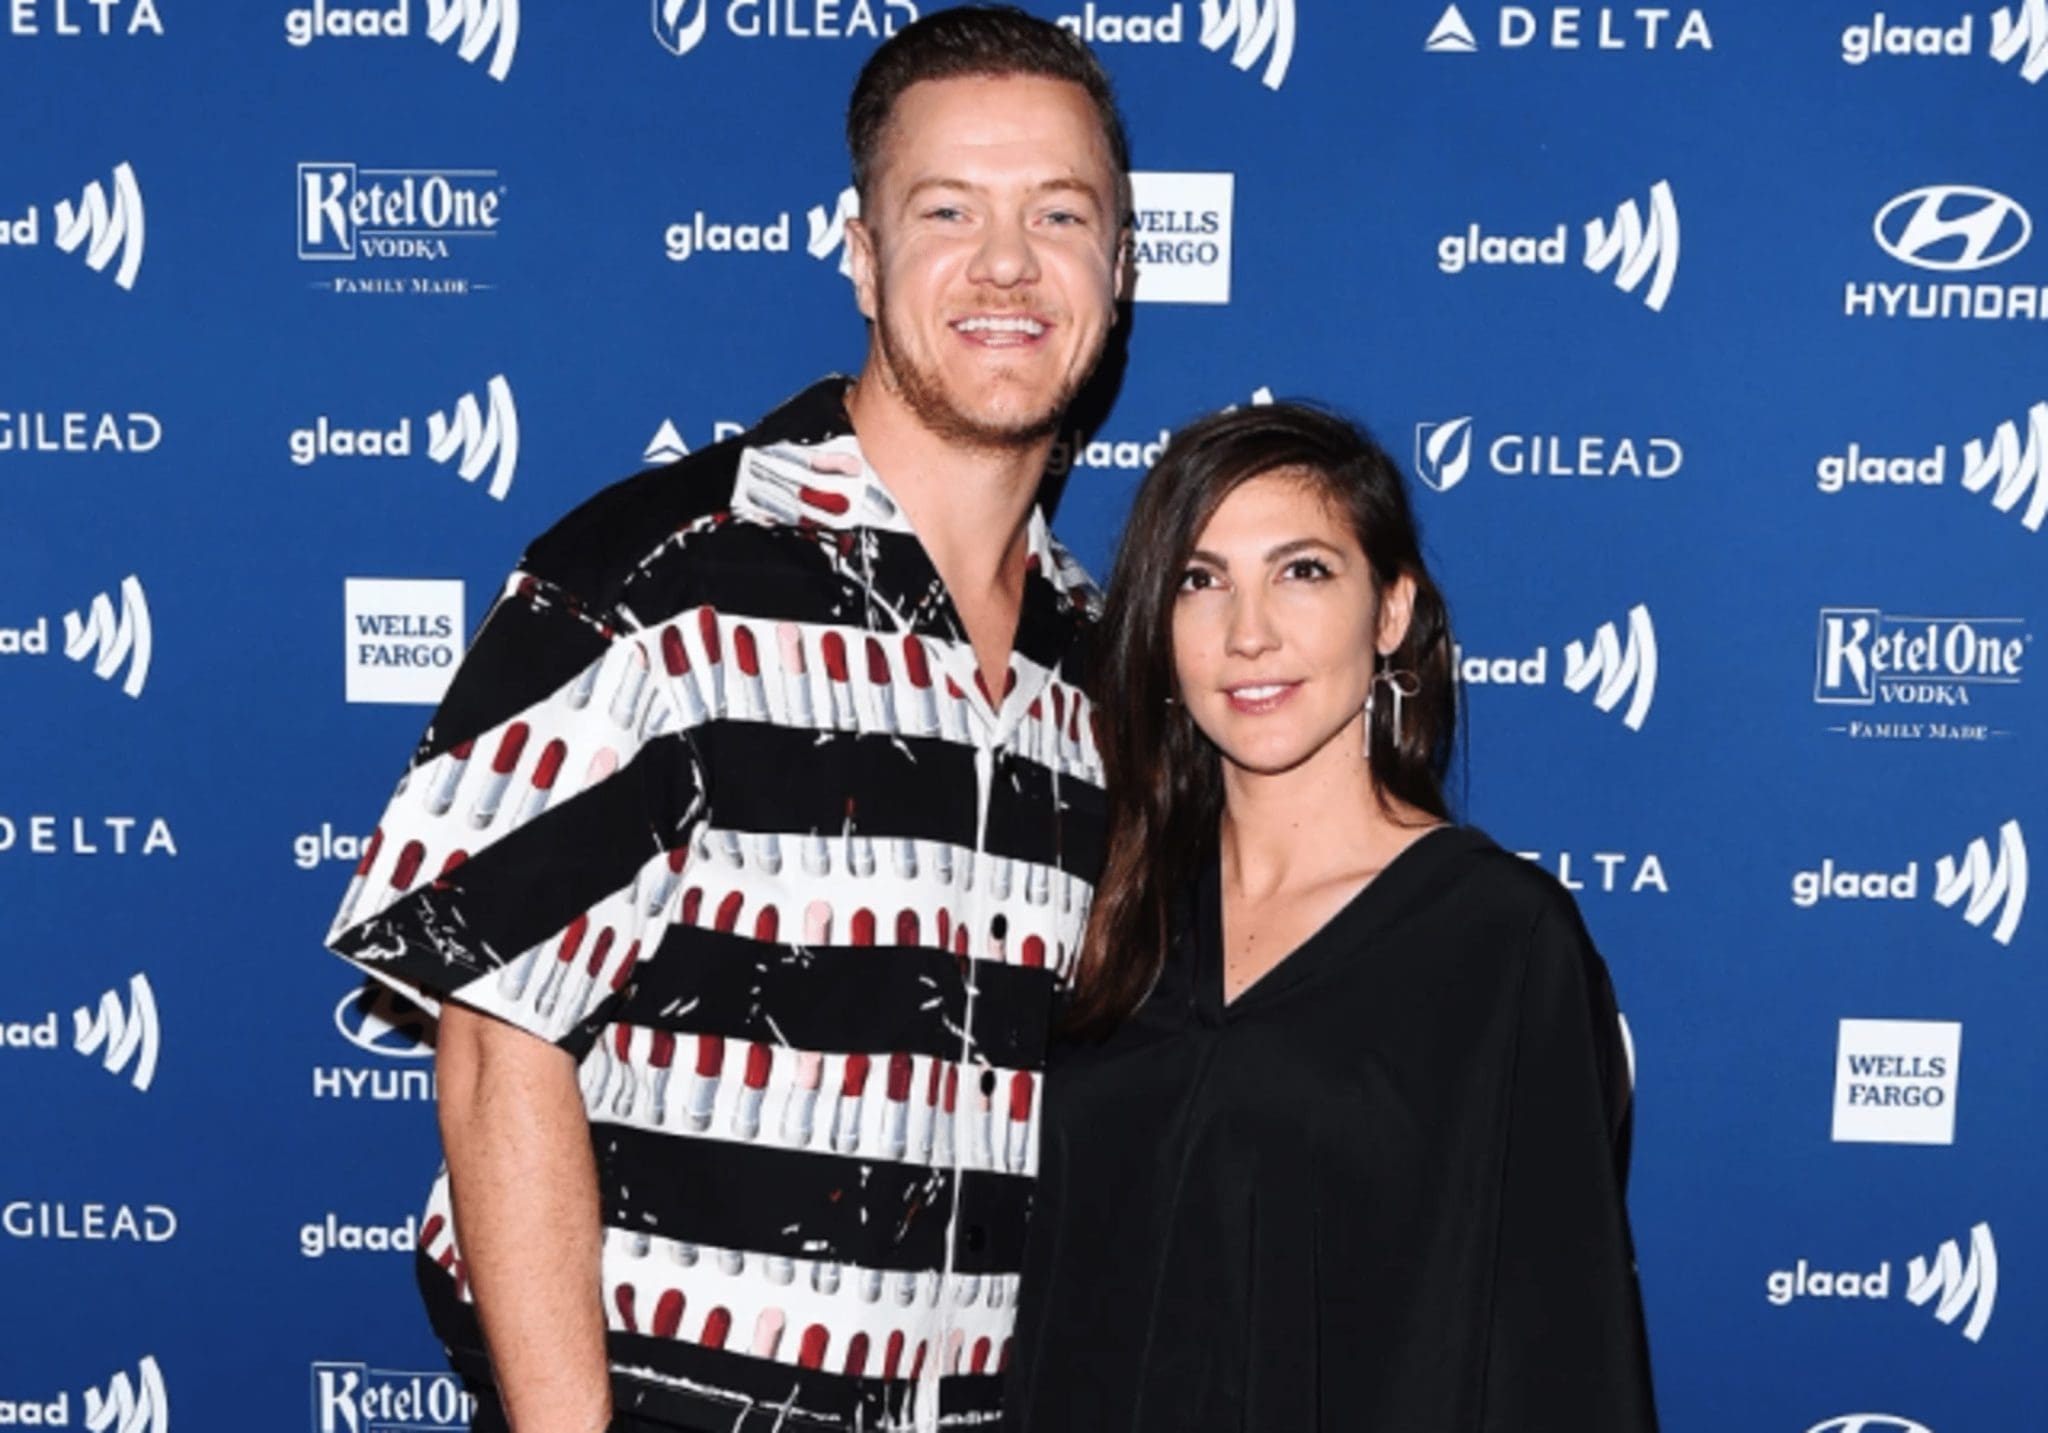 Dan Reynolds, Of Imagine Dragons, Has Announced That He And His Wife, Aja Volkman, Are No Longer Together